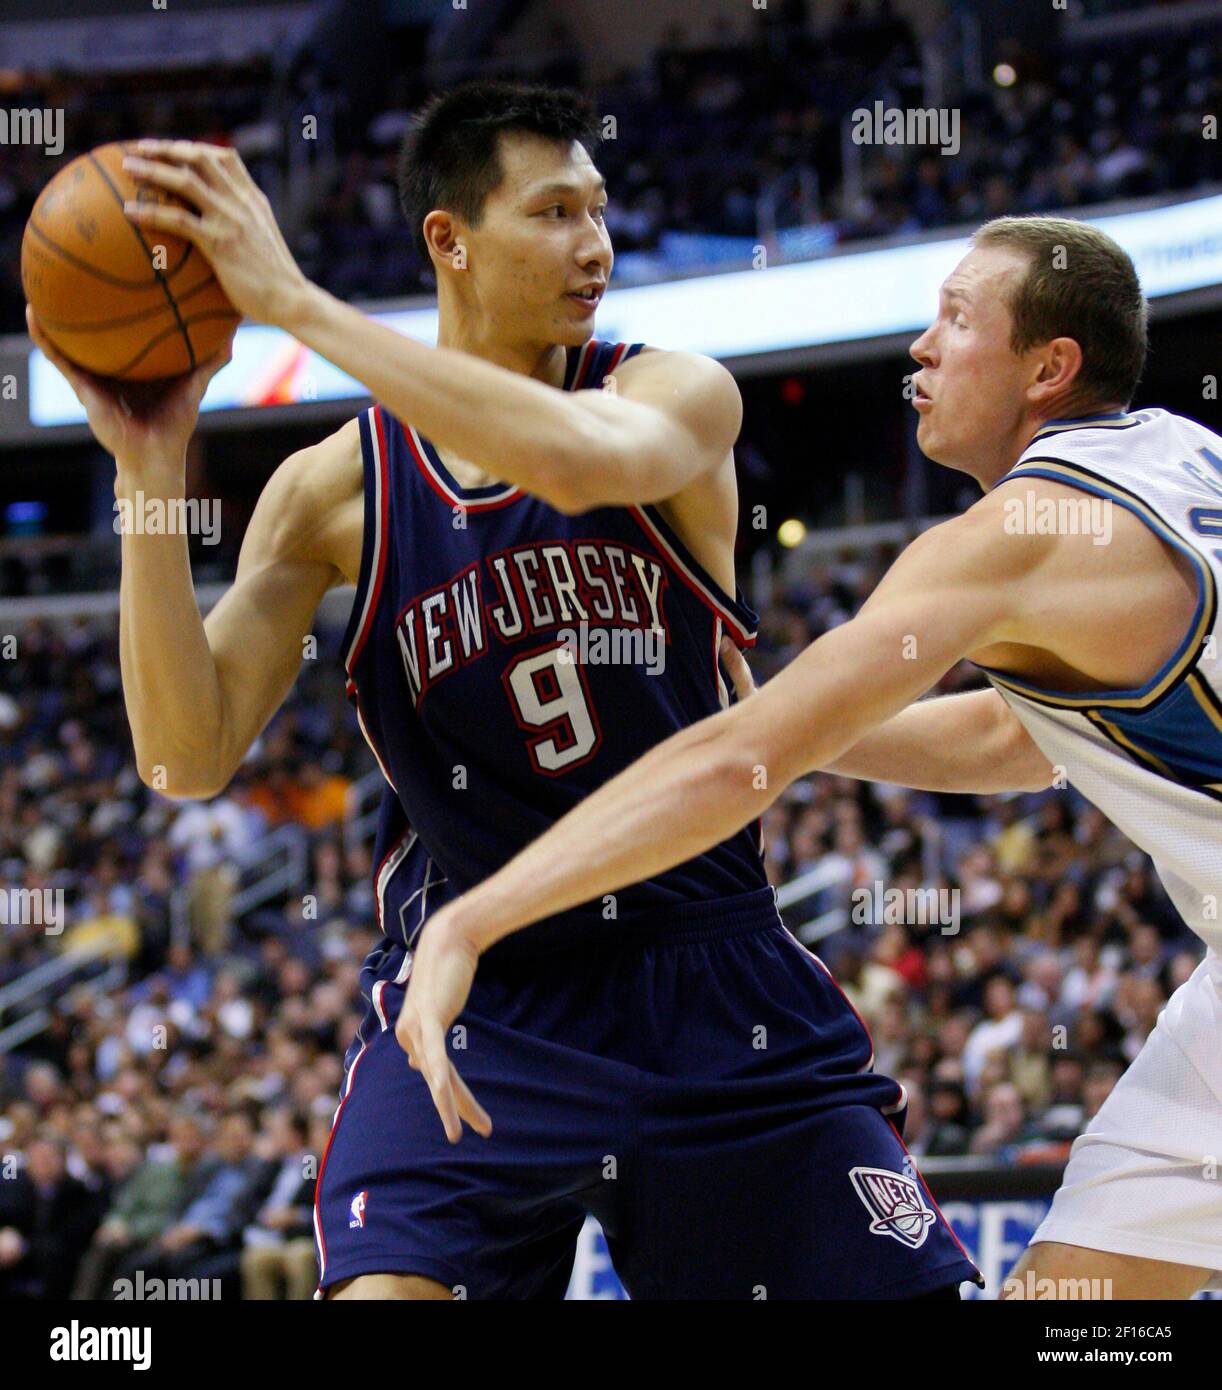 New Jersey Nets' Yi Jianlian, of China, left, blocks a shot by Boston  Celtics' Kendrick Perkins (43) during the first half of an NBA basketball  game in Boston, Friday, Feb. 5, 2010. (